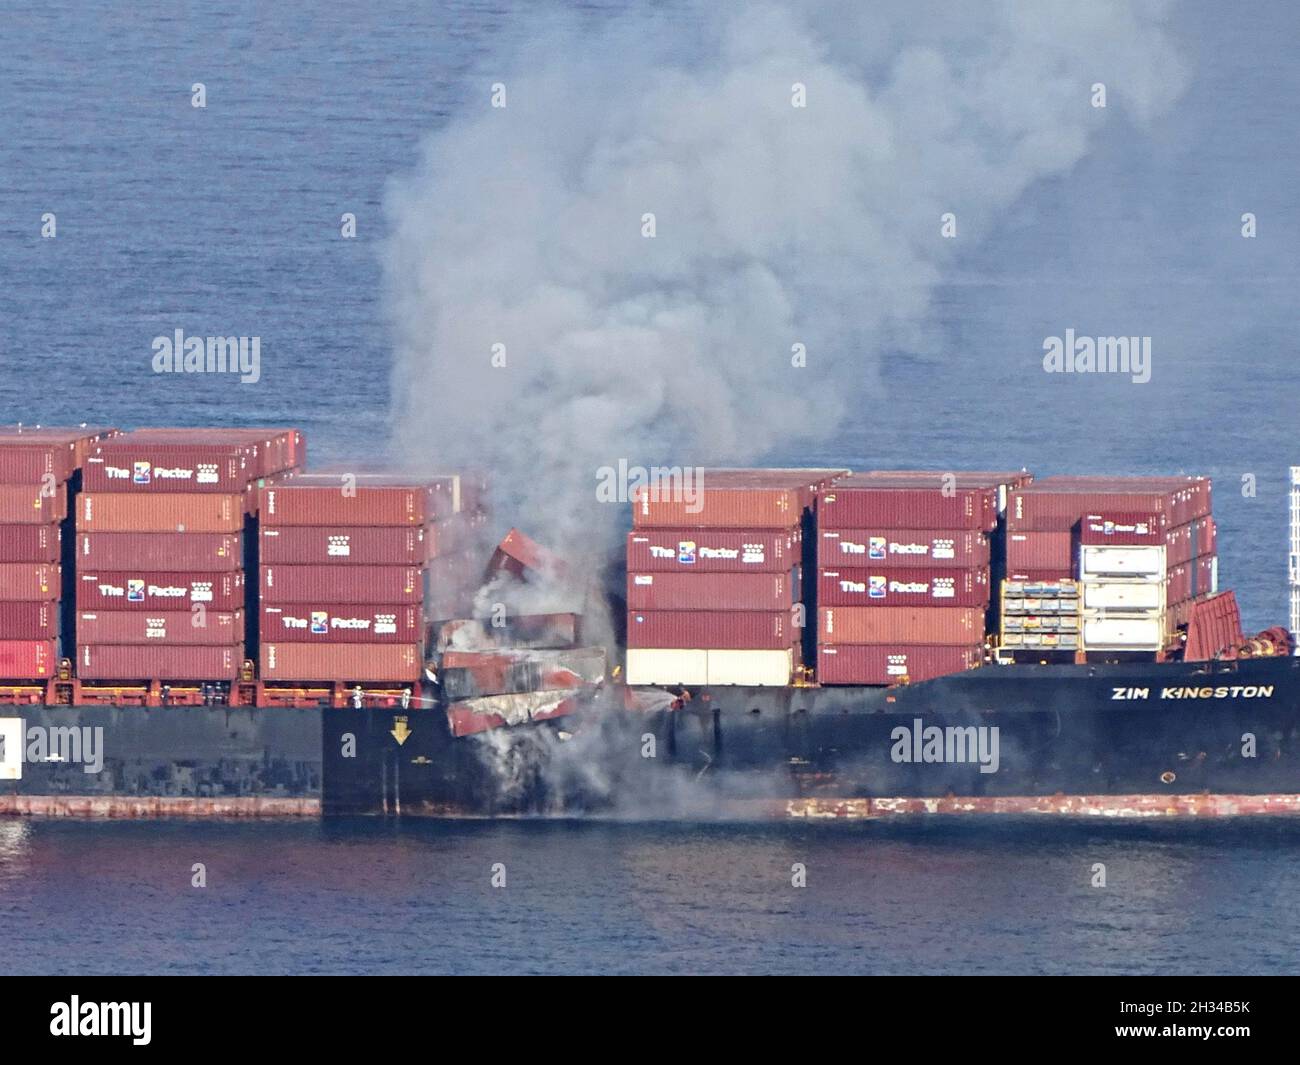 Victoria, Canada. 23rd Oct, 2021. The commercial cargo ship MV ZIM Kingston, burns after losing 40 shipping containers during transit in the Strait of Juan de Fuca October 23, 2021 near Victoria, British Columbia, Canada. The shipping containers were carrying potassium amylxanthate which ignited. Credit: PO3 Diolanda Caballero/U.S. Coast Guard/Alamy Live News Stock Photo